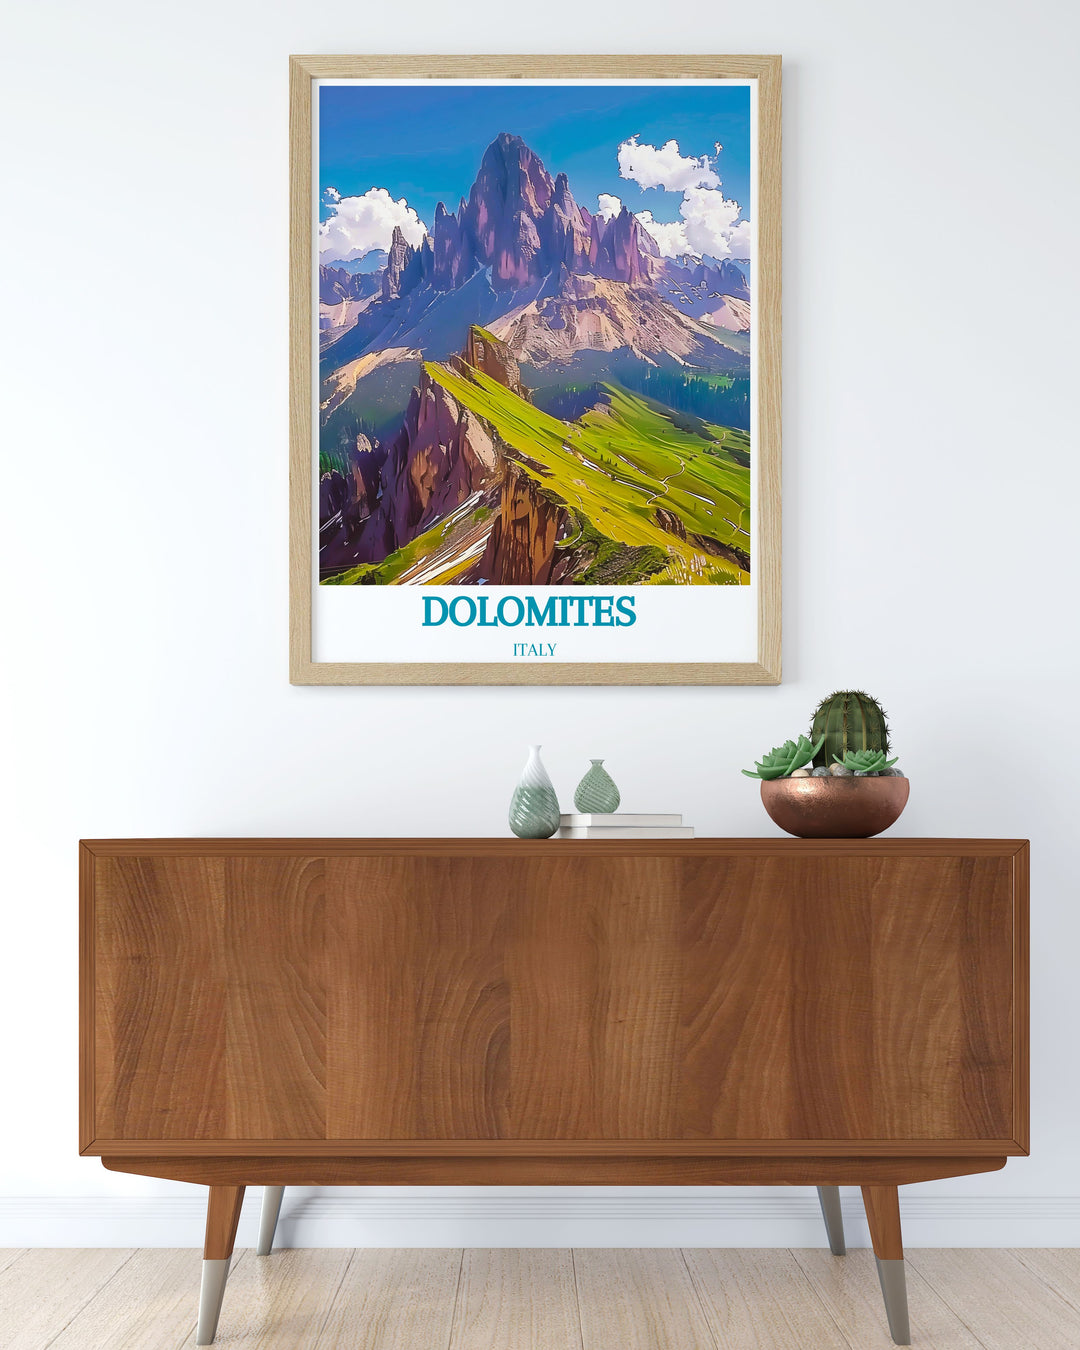 Framed art showcasing the stunning views of the Dolomites, capturing the natural splendor and alpine beauty of Italy’s iconic mountain range.